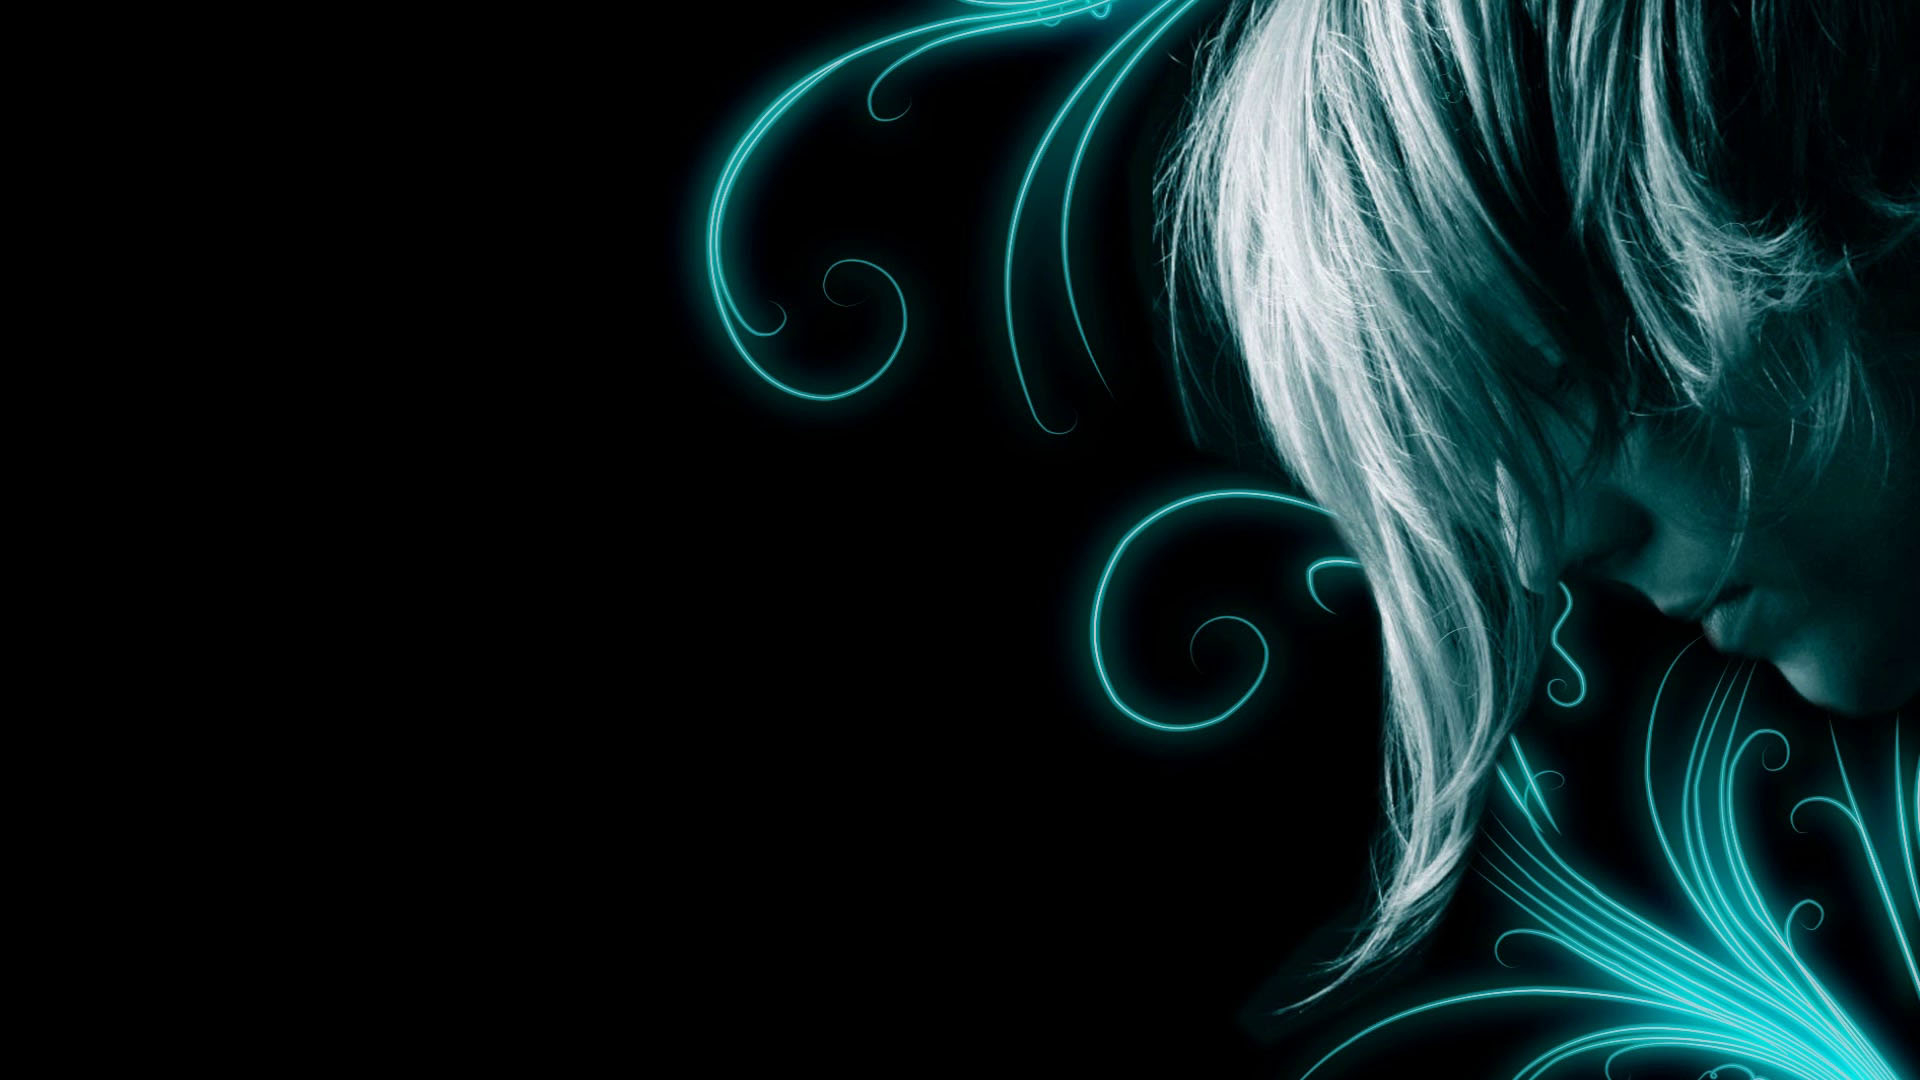 Free download Displaying 18 Image For Teal And Black Hair [1920x1080] for your Desktop, Mobile & Tablet. Explore Cool Teal Wallpaper. Pretty Teal Wallpaper, Teal Abstract Wallpaper, Cute Teal Wallpaper